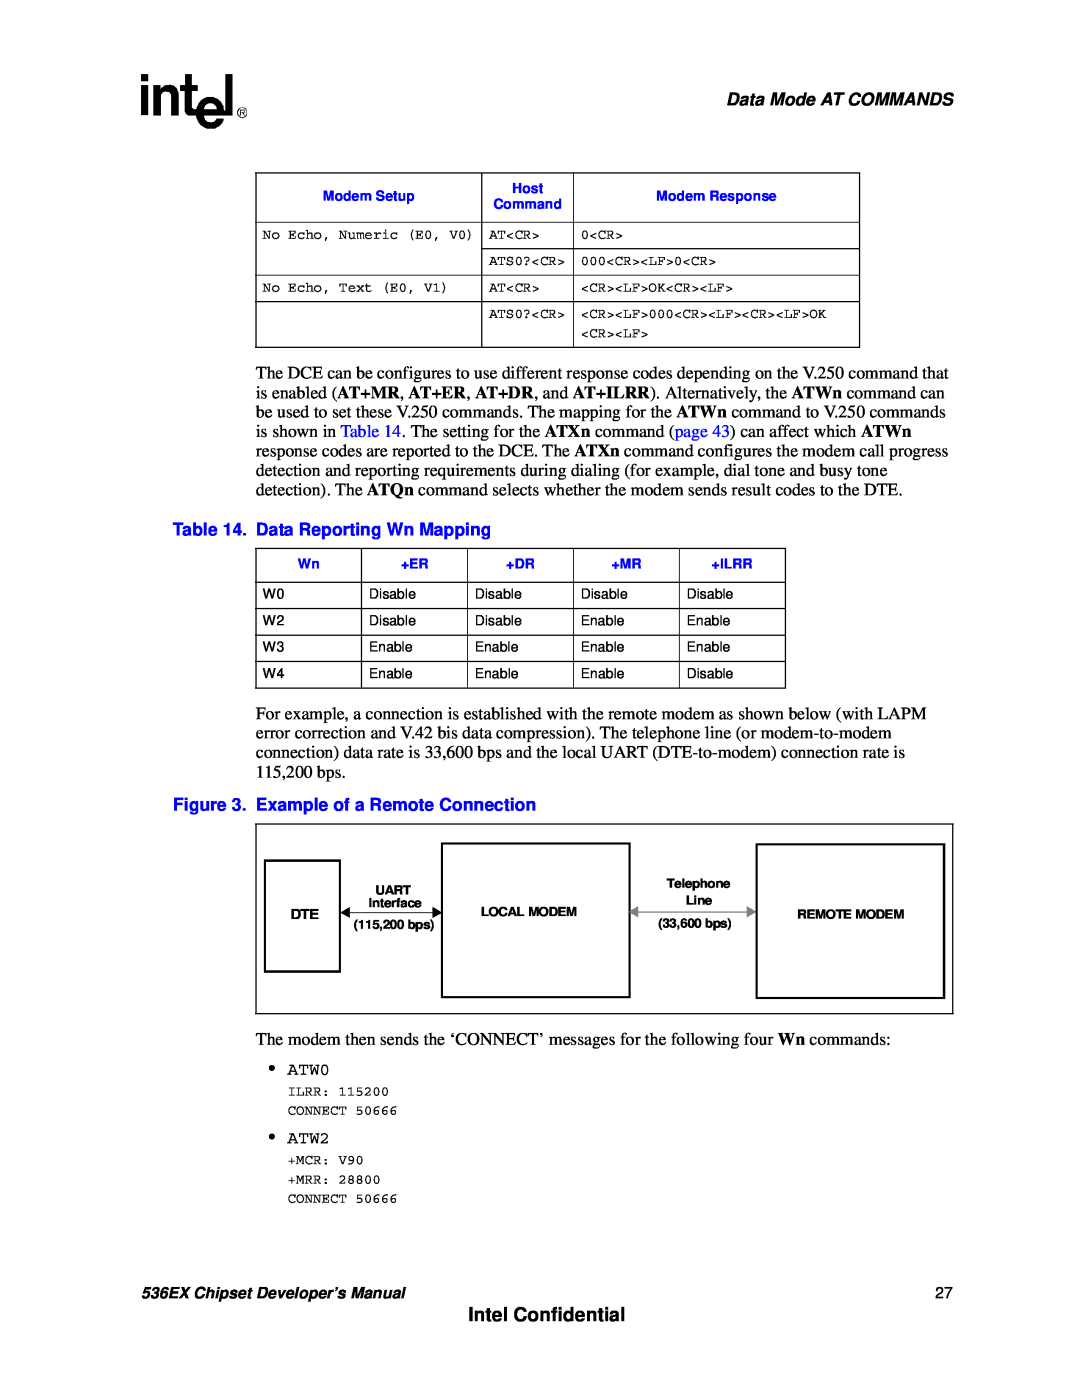 Intel 536EX Intel Confidential, Data Mode AT COMMANDS, Data Reporting Wn Mapping, Example of a Remote Connection, ATW0 